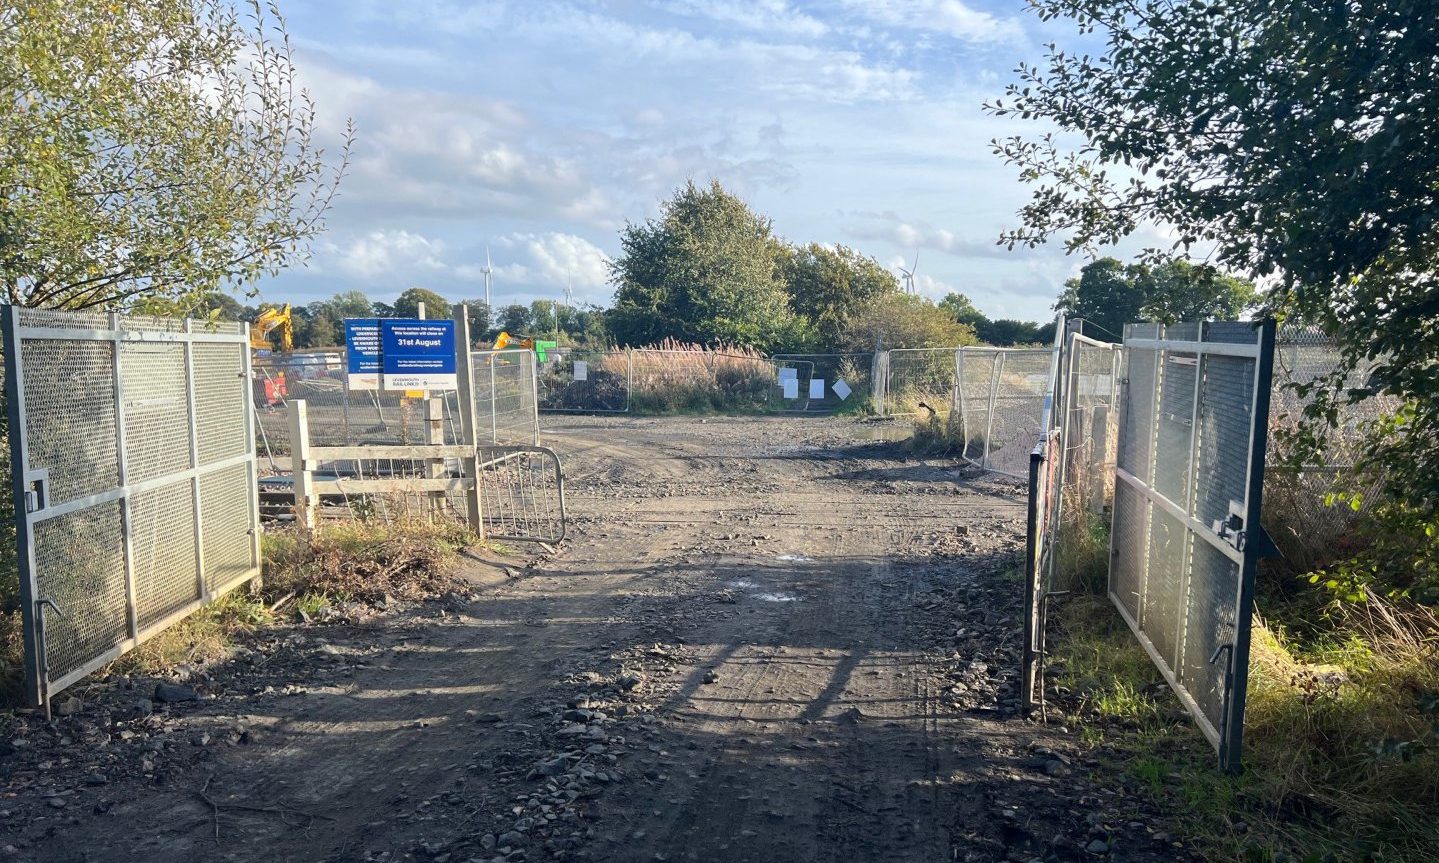 Gates are regularly being left open at Doubledykes railway crossing, despite its official closure for safety reasons.